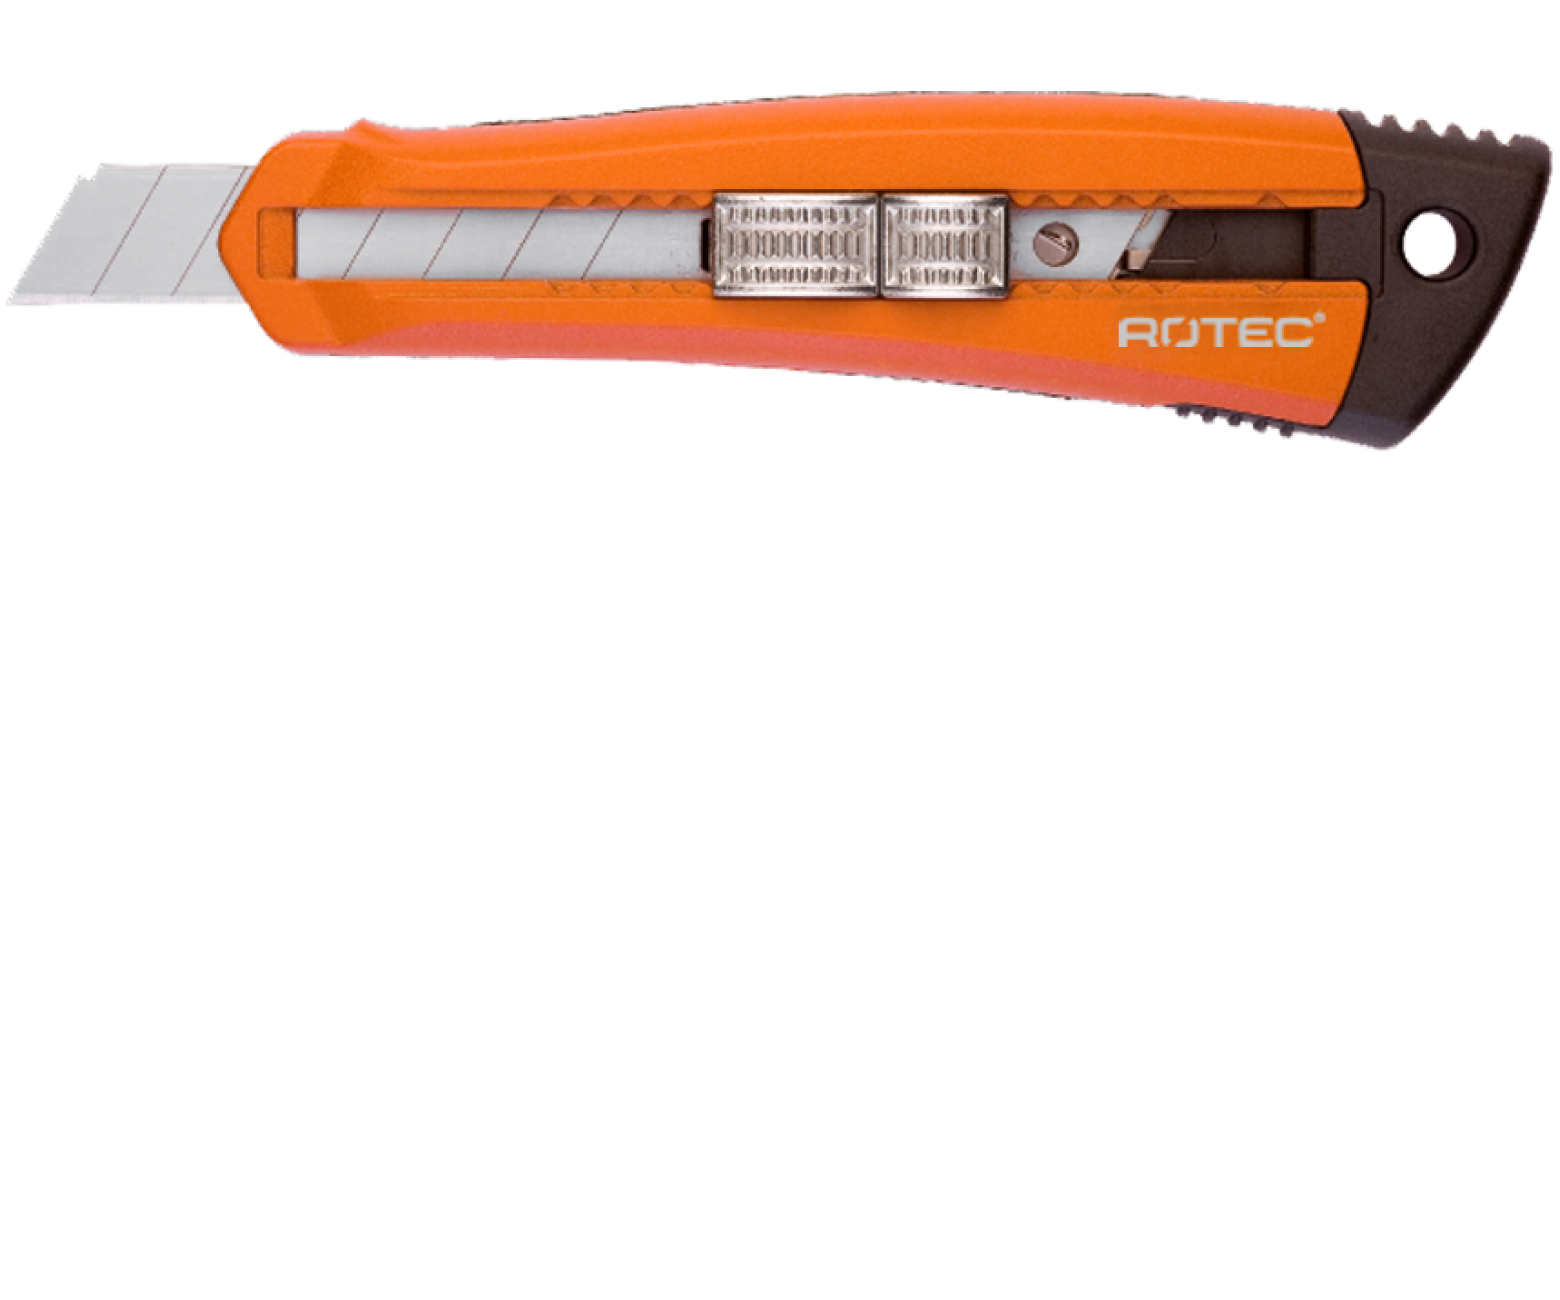 Snap-off utility knife, Premium, 18mm